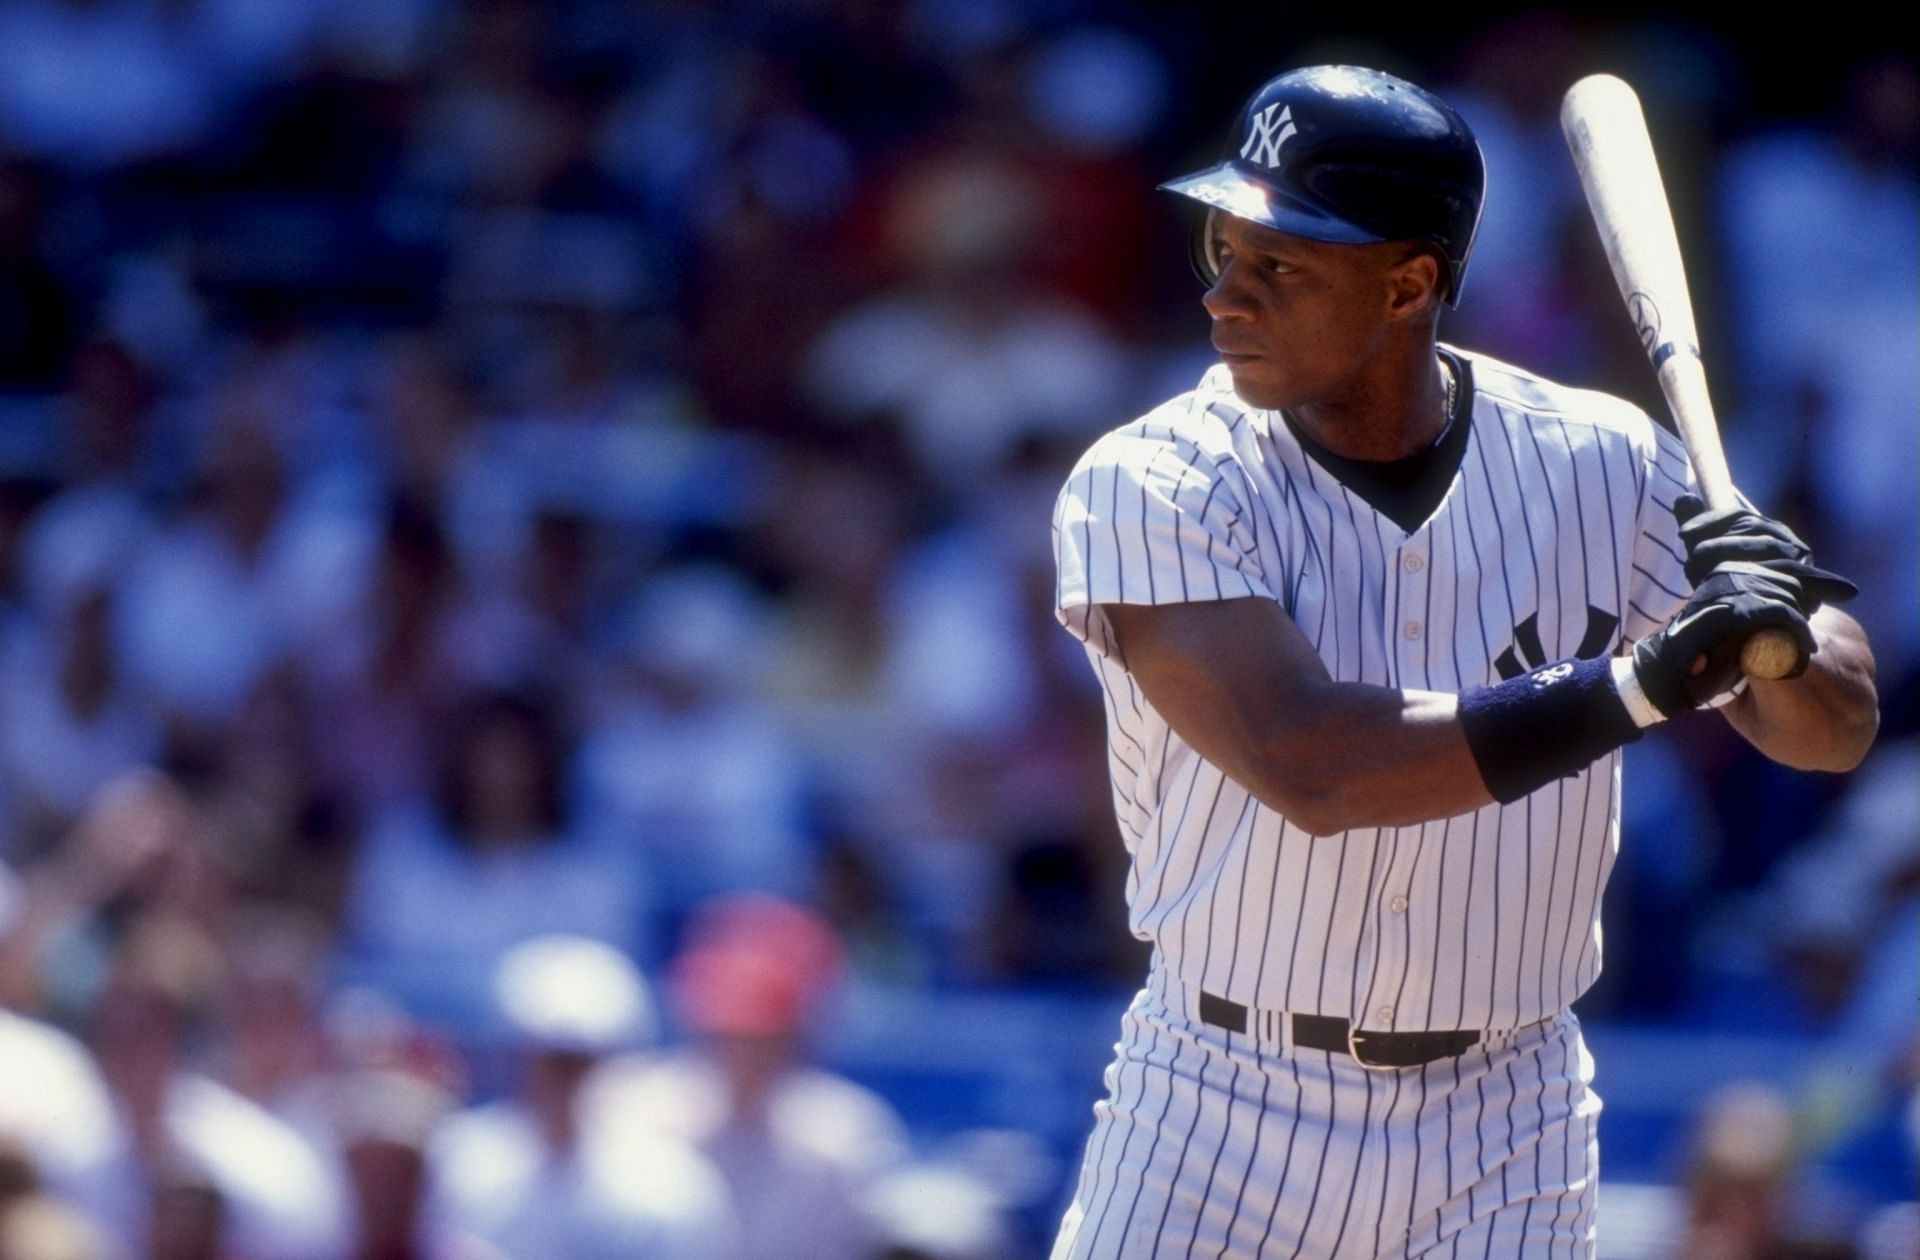 Darryl Strawberry #39: 12 Aug 1998: Darryl of the New York Yankees stands ready to swing during a game against the Minnesota Twins at Yankee Stadium in Bronx, New York. The Yankees defeated the Twins 11-2.